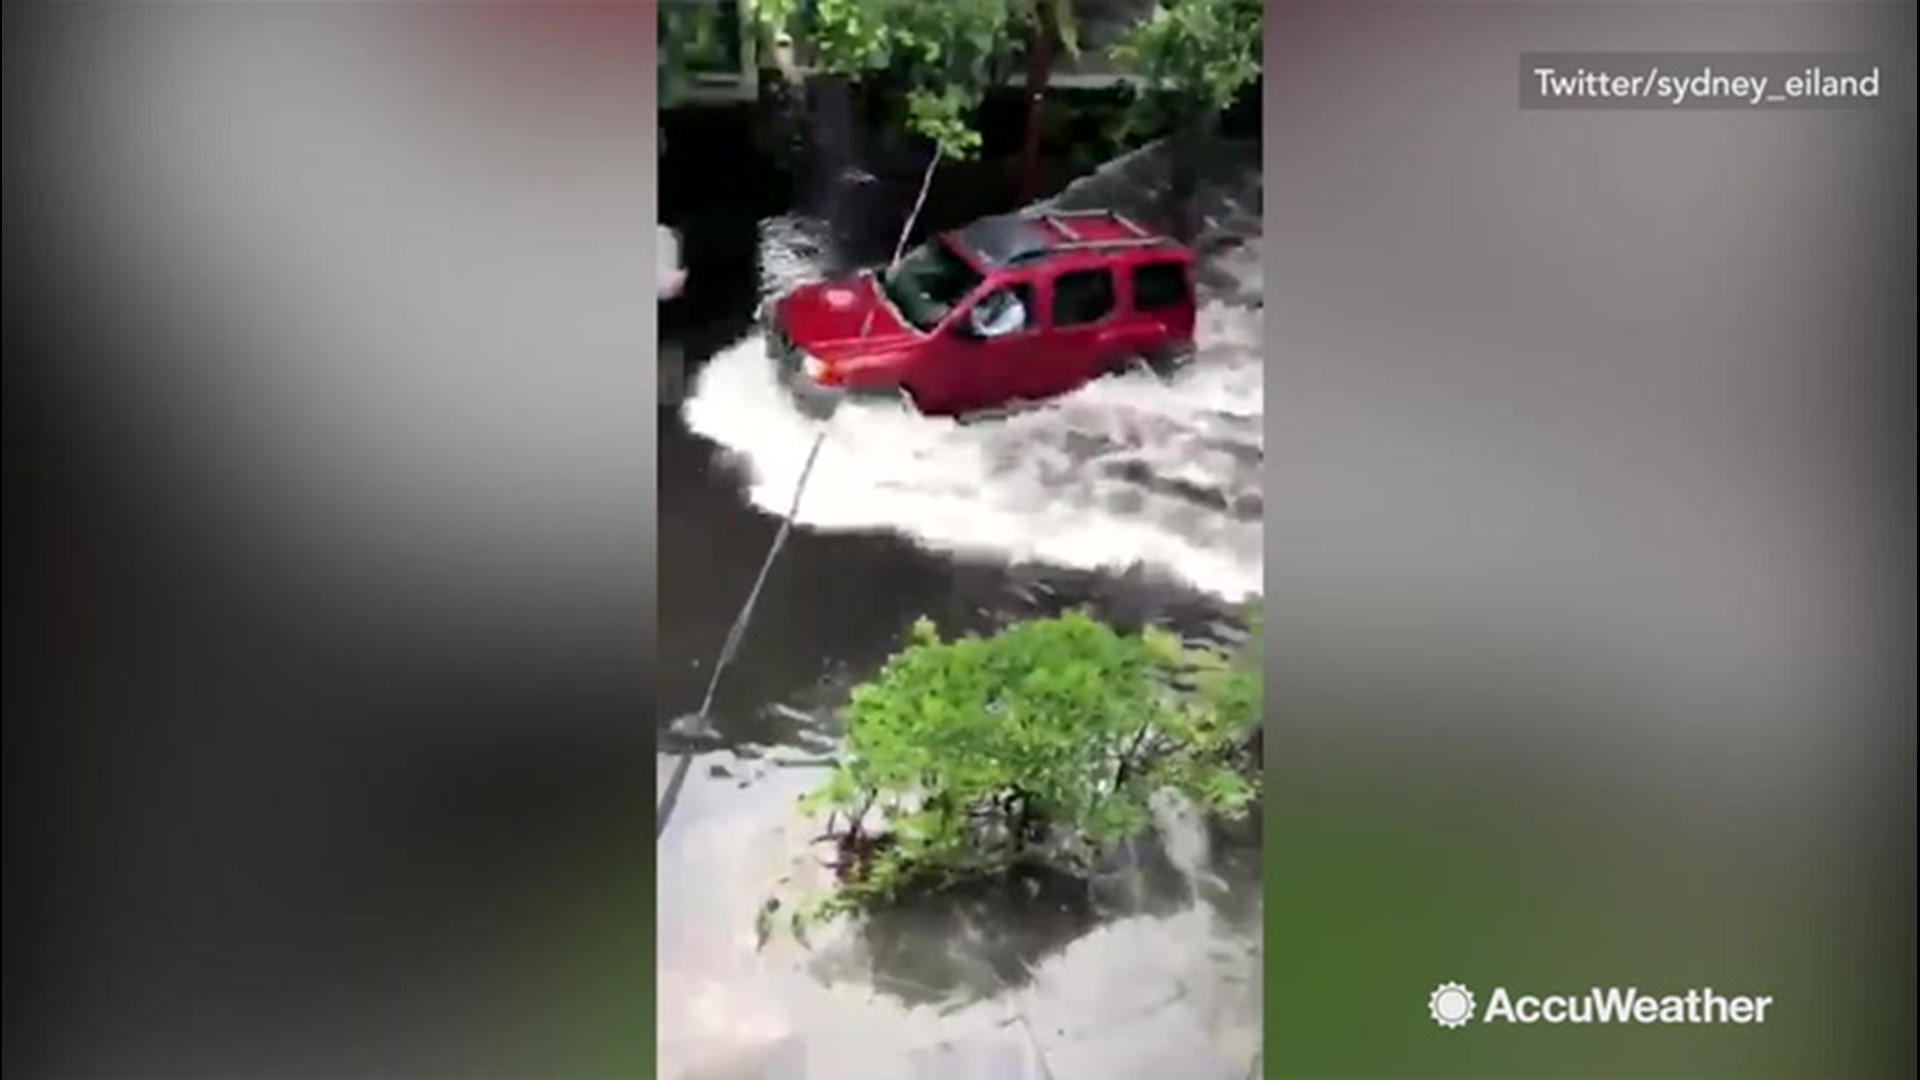 Heavy rain pummeled Charleston, South Carolina on June 12, dropping over three inches of water across the area. Drivers continued to travel in flooded parts of the city, causing waves to crash against sidewalks and homes.